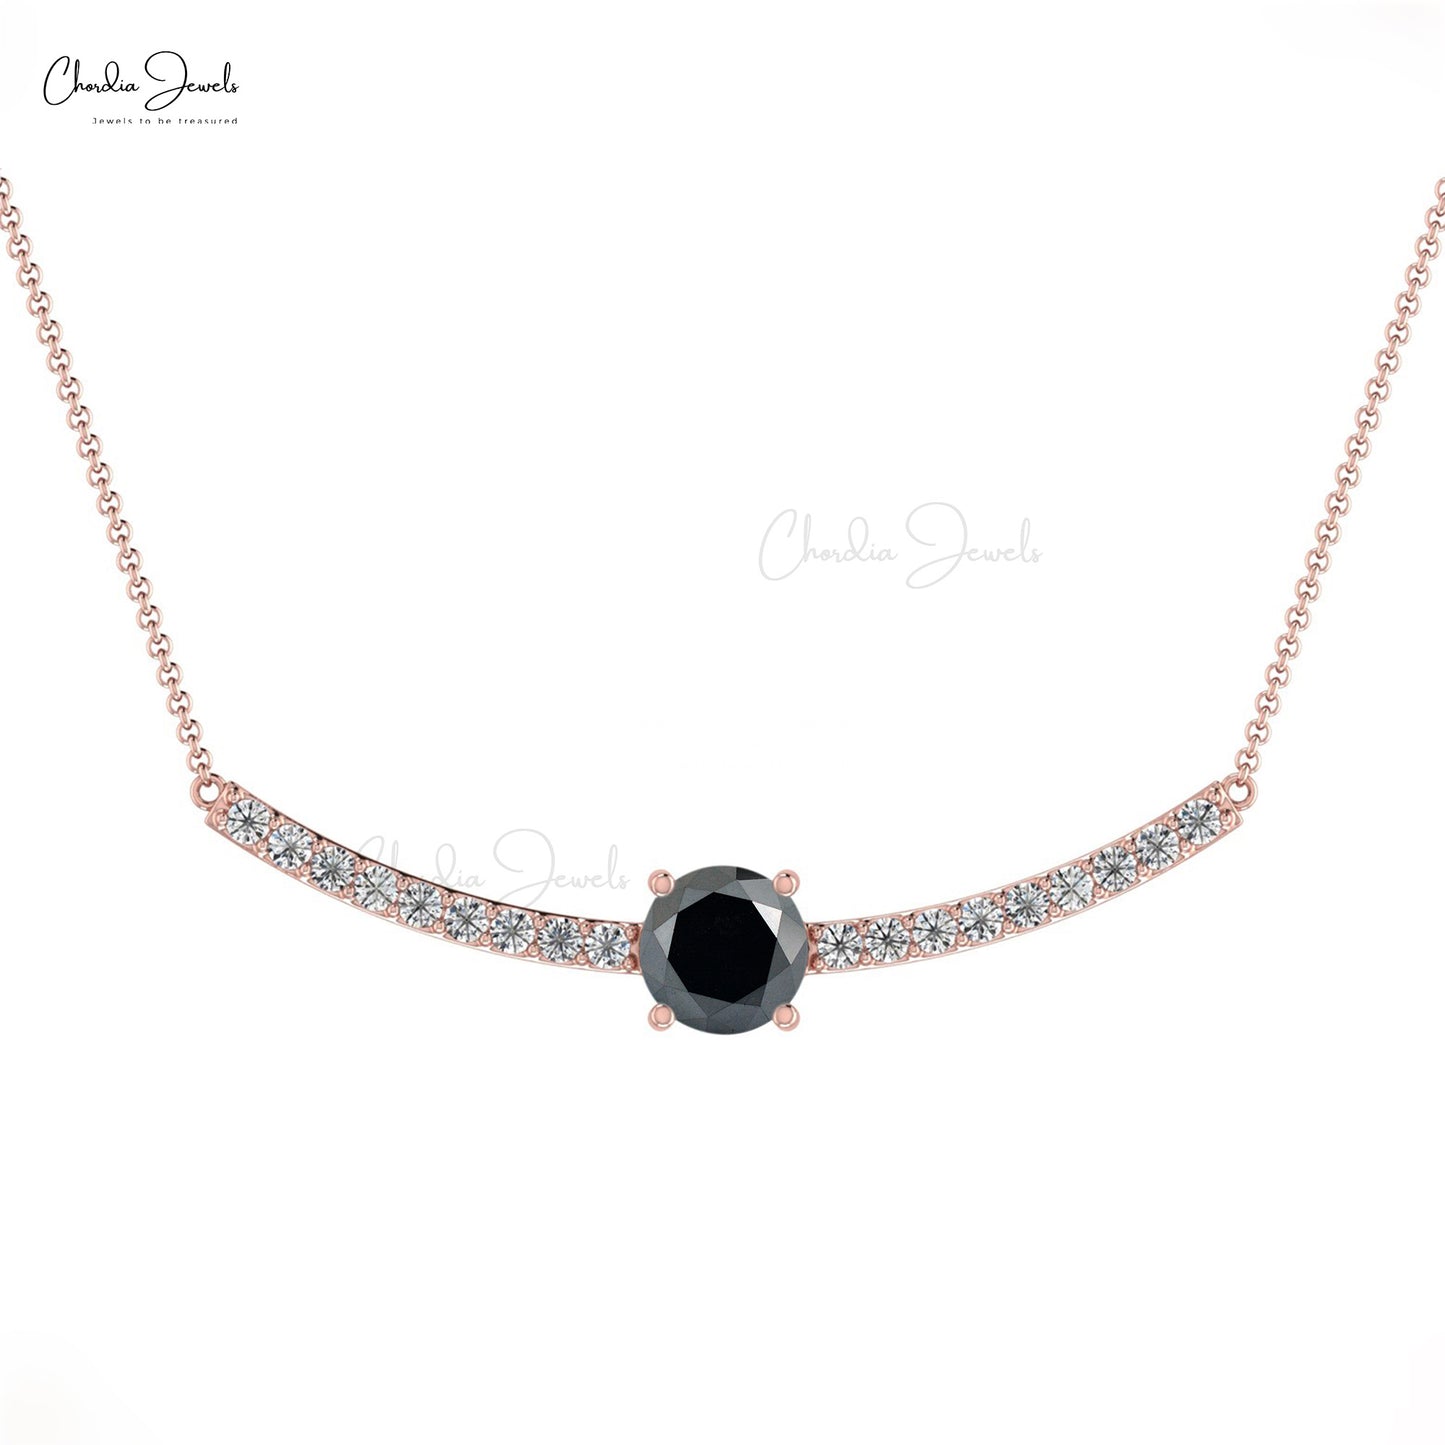 Natural Black Diamond and White Diamond Necklace, 5mm Round April Birthstone Necklace, 14k Solid Gold Statement Necklace Gift for Her